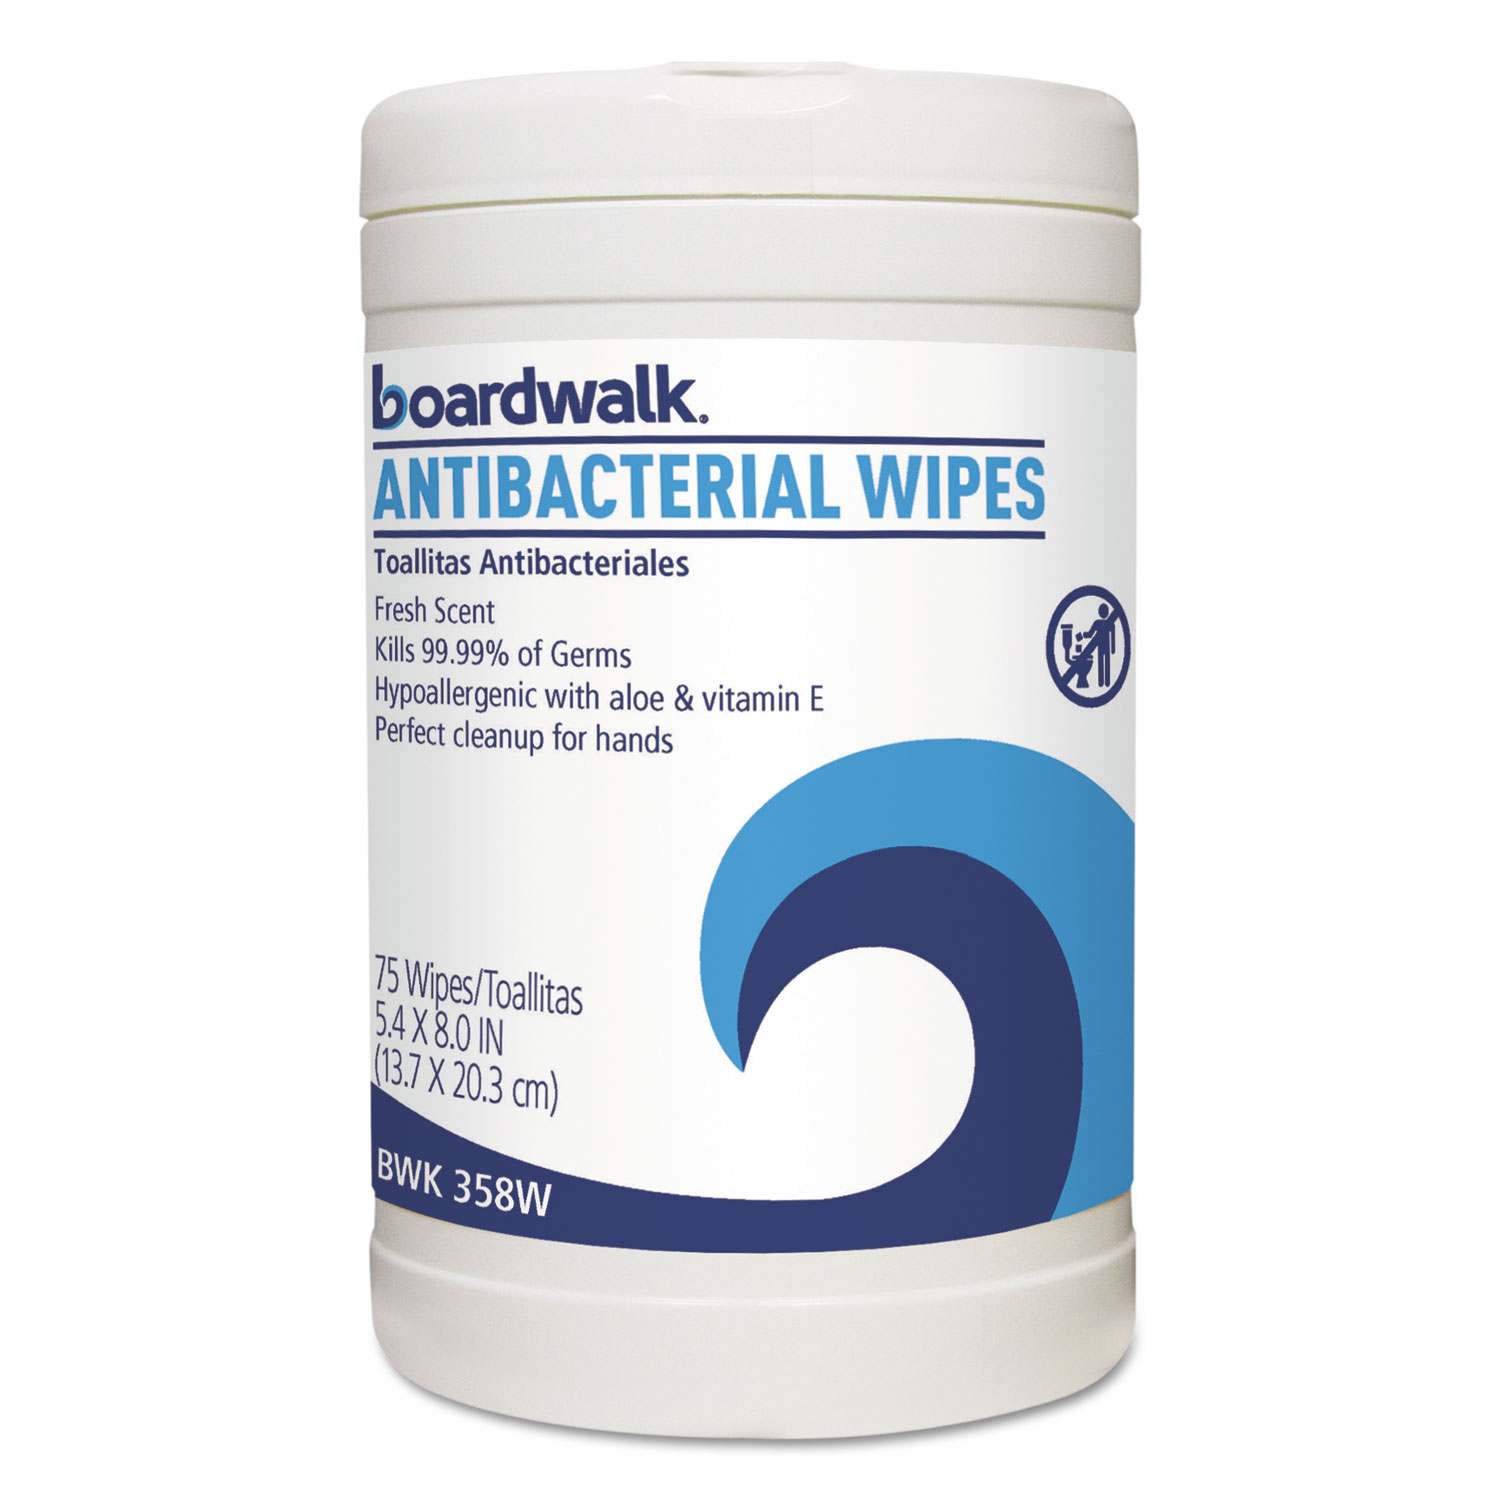  Boardwalk BWK458W Antibacterial Wipes, 8 x 5 2/5, Fresh Scent, 75/Canister, 6 Canisters/Carton (BWK458W) 